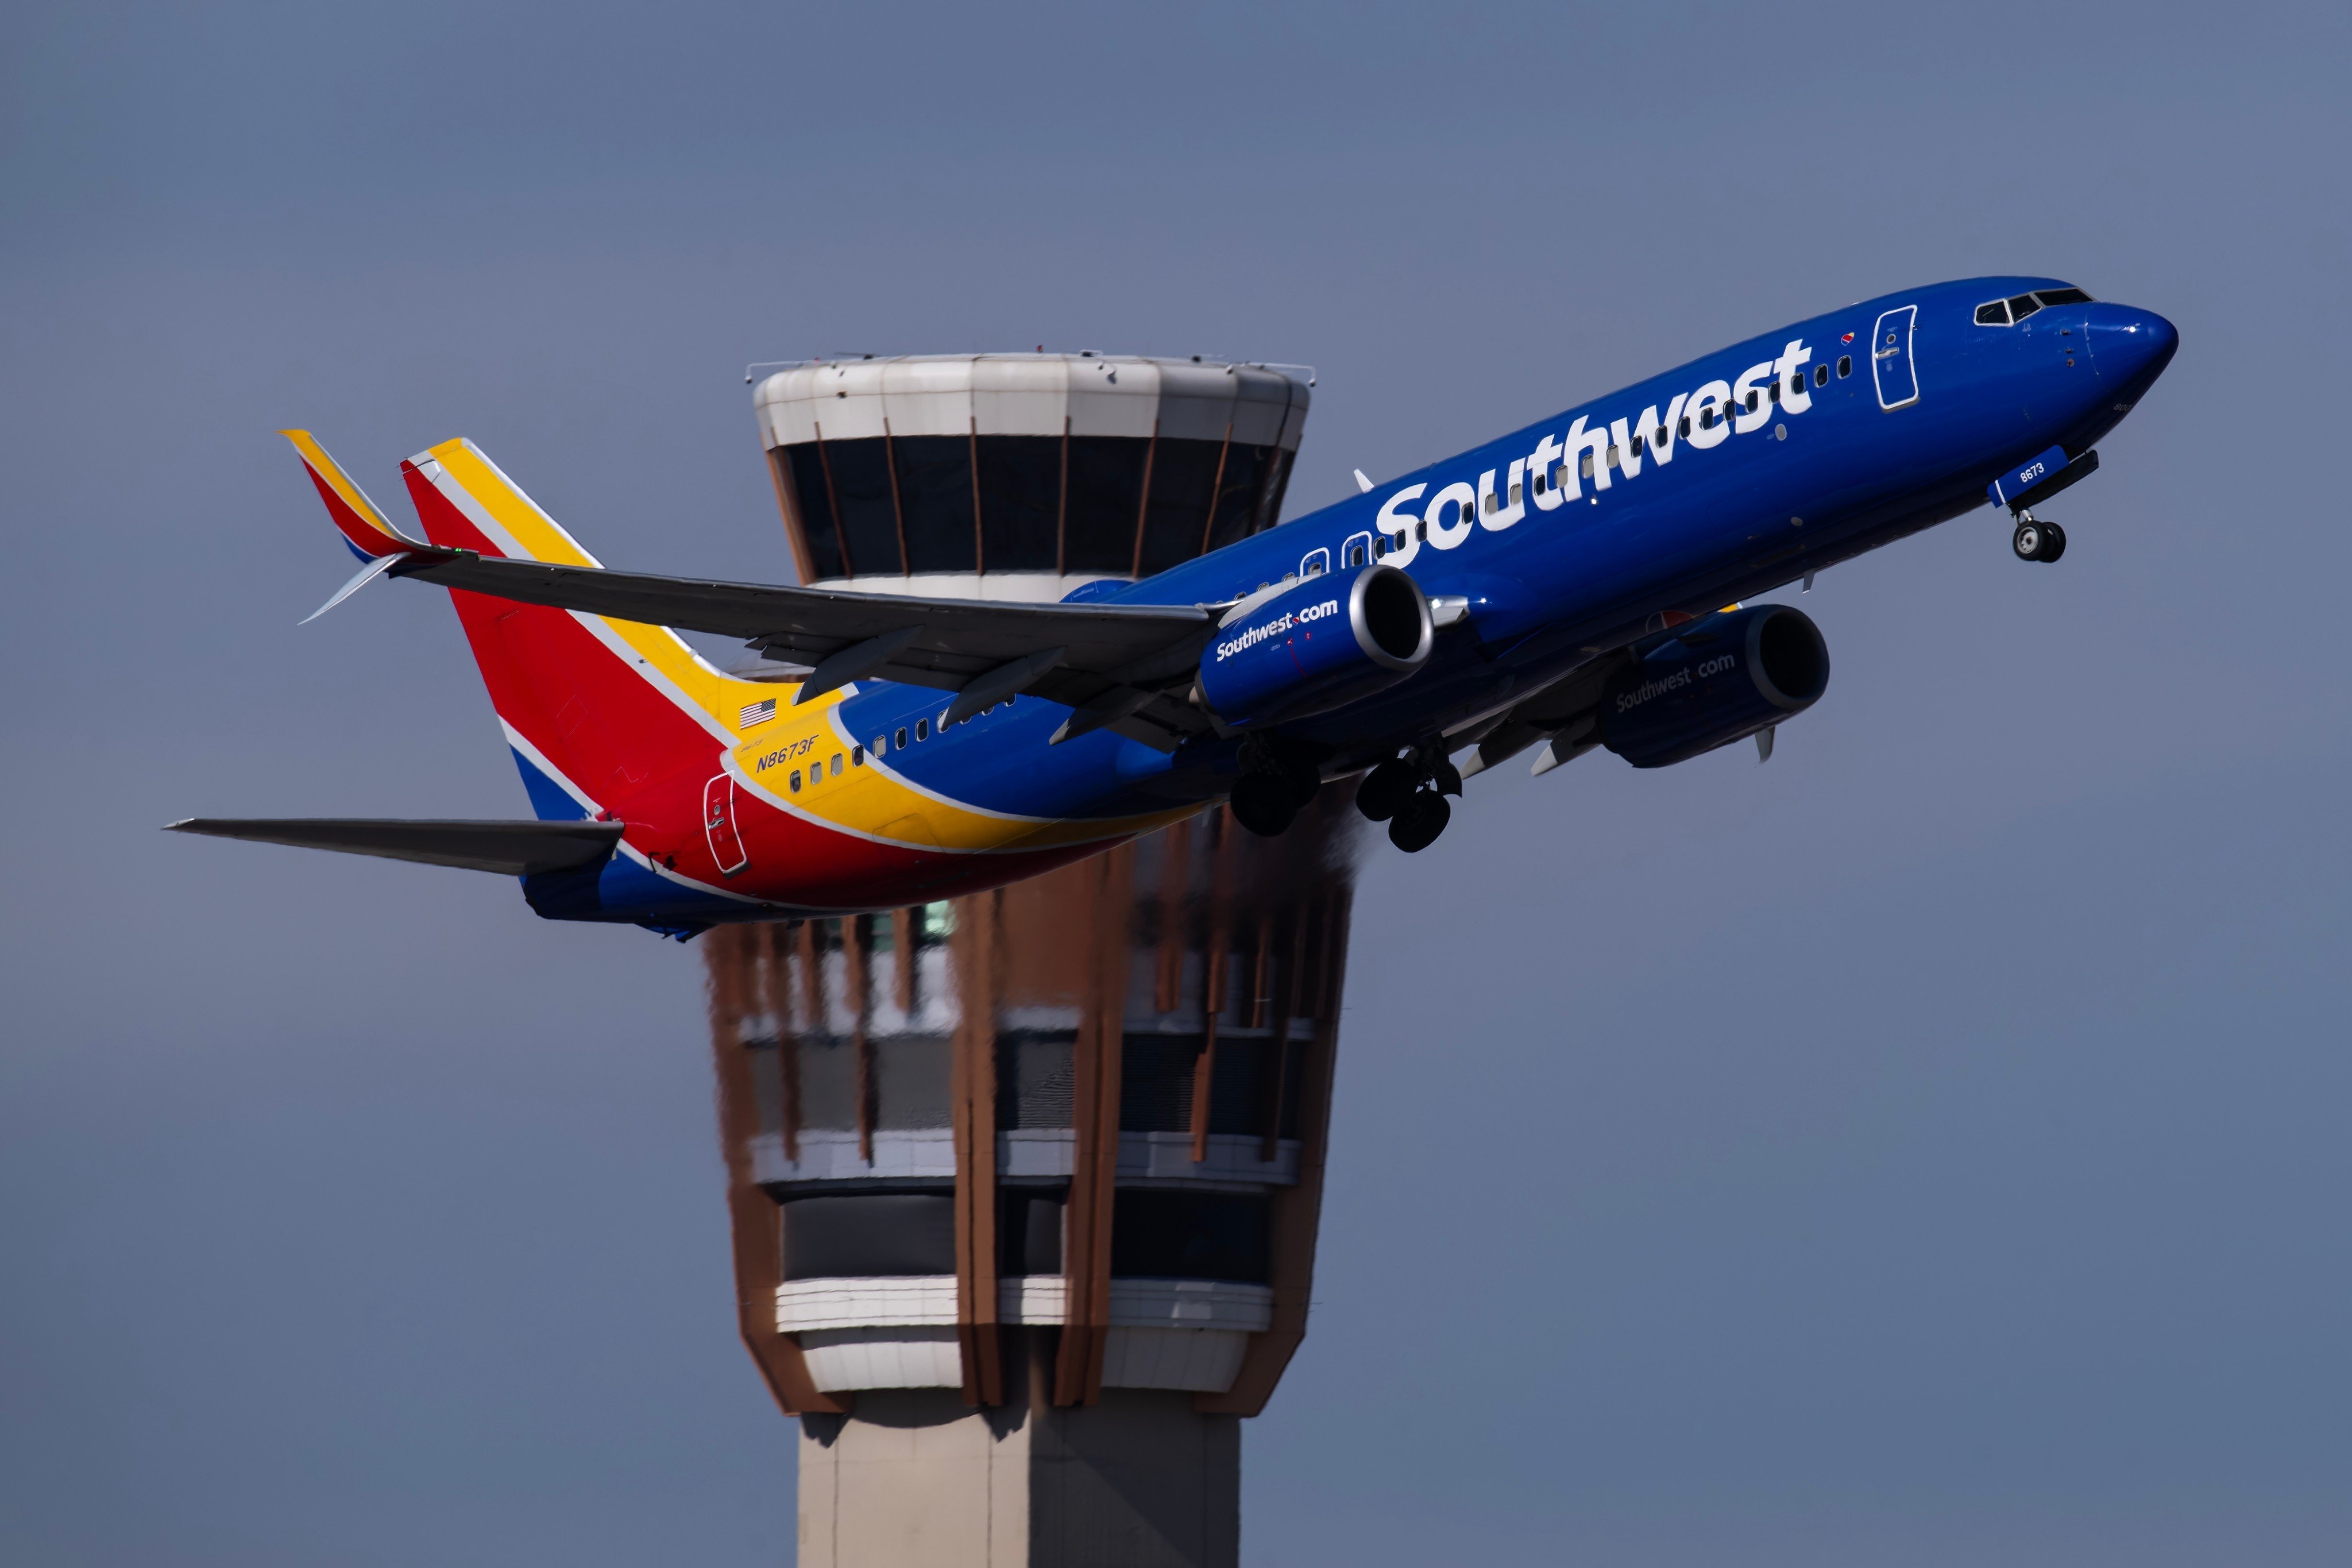 A Southwest Airlines Boeing 737-800. File photo: Shuttertstock